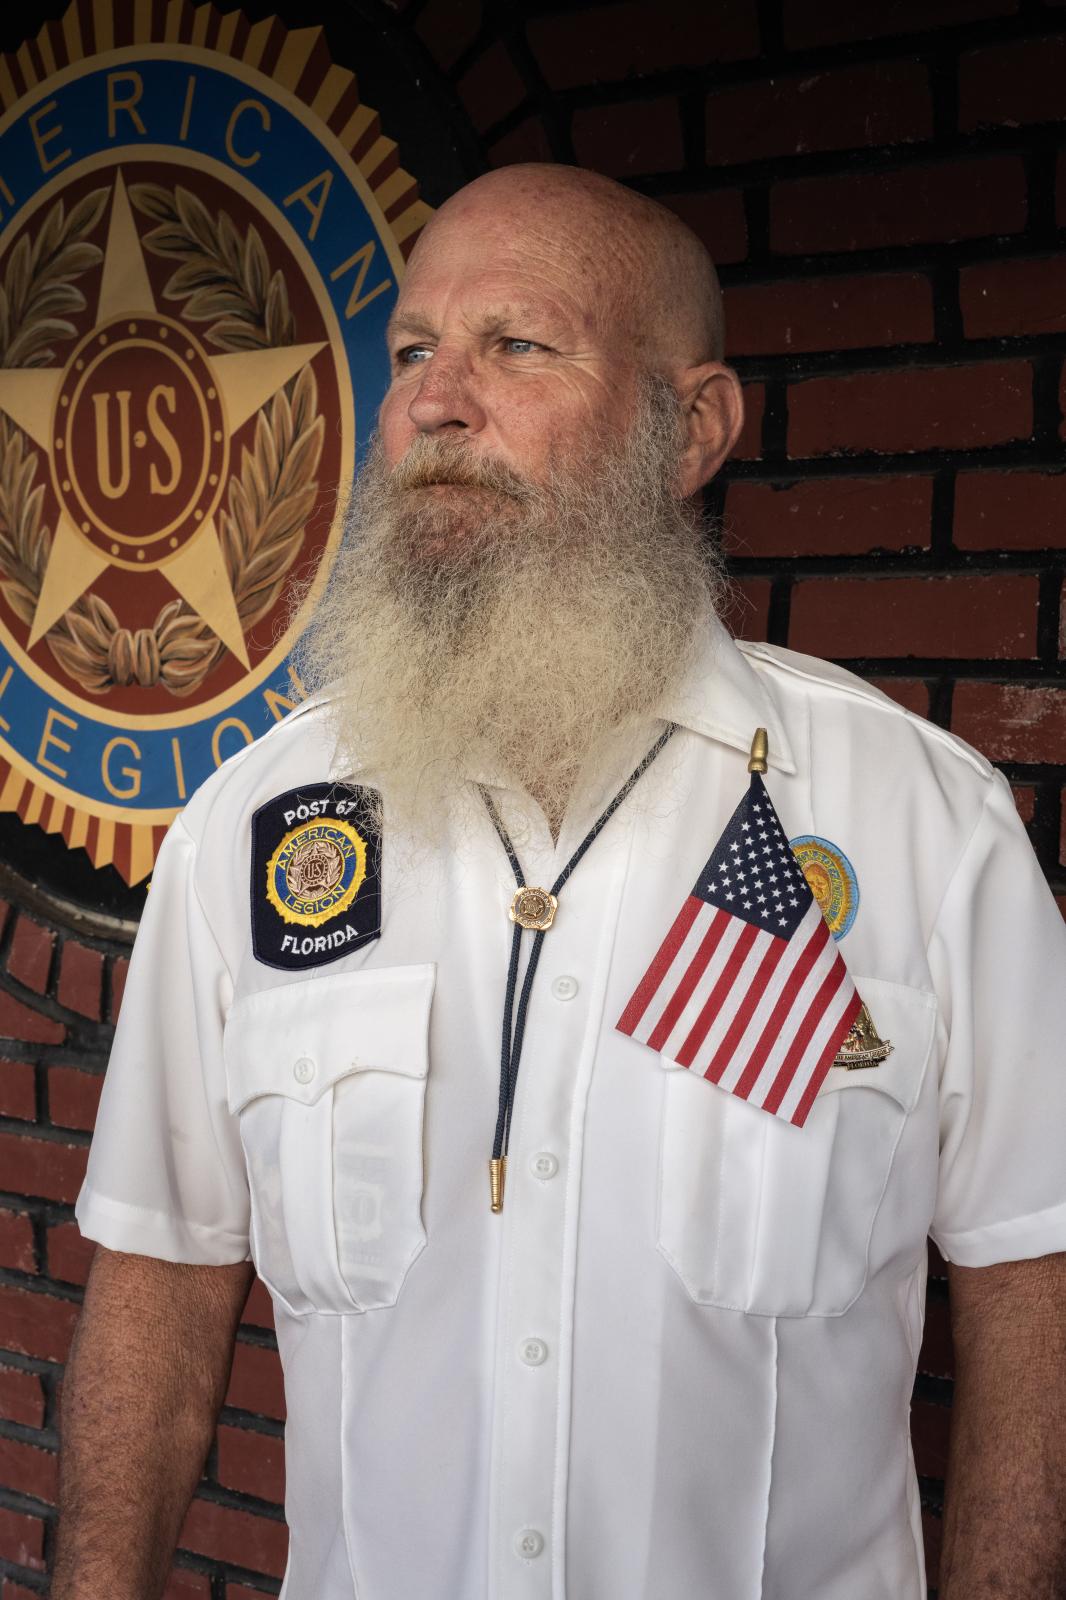 Post 67: American Legion, American Stories - Jeff Bodine, a native Miamian, was injured in a workplace accident and can no longer work....